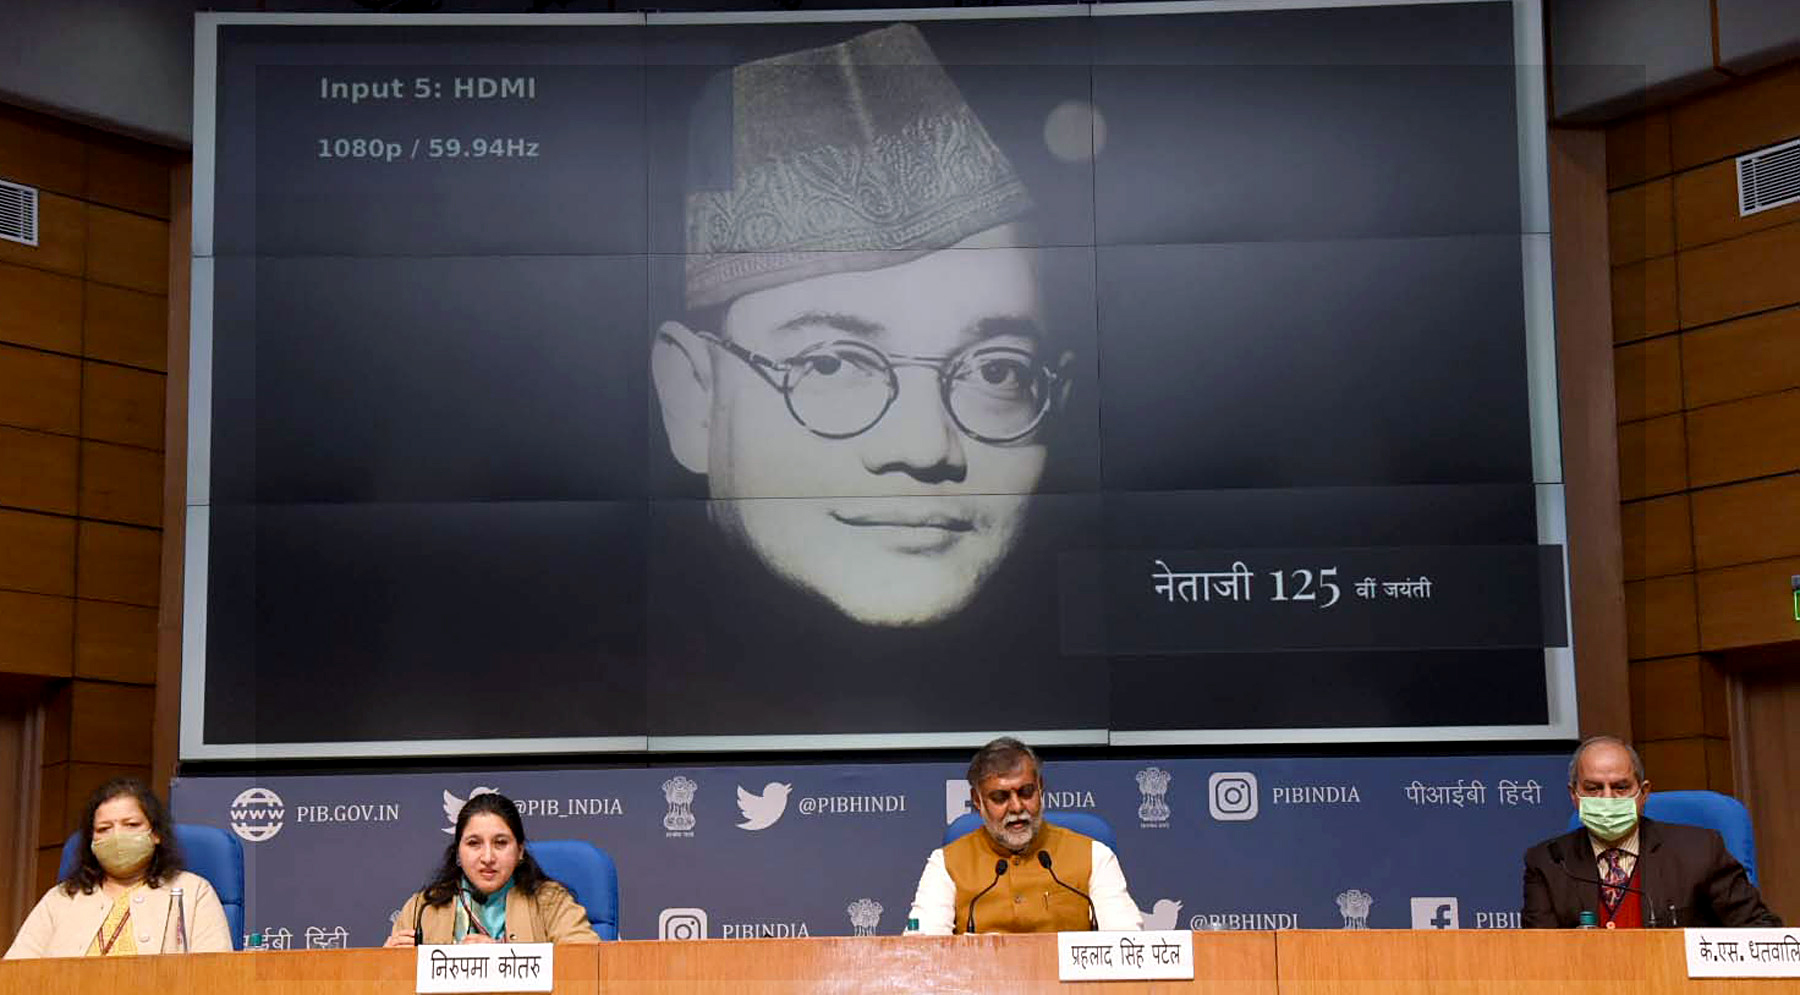 Minister of State for Culture and Tourism (Independent Charge), Prahlad Singh Patel addressing a press conference on celebrations of the 125th birth anniversary year of Netaji Subhas Chandra Bose, in New Delhi